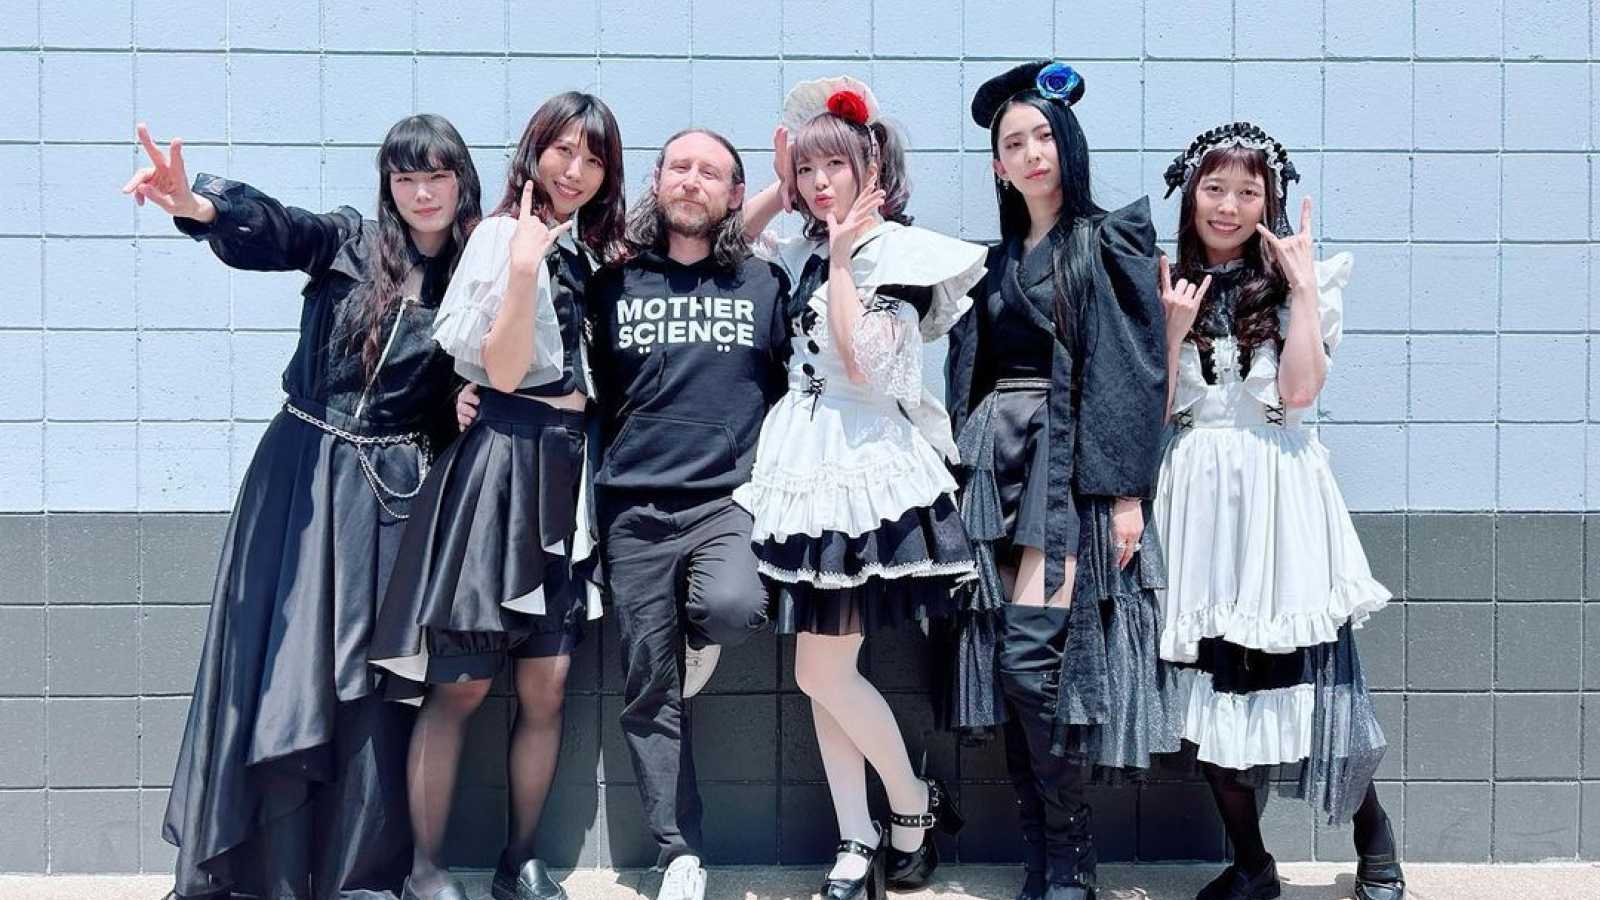 BAND-MAID publie le clip de "Bestie" © BAND-MAID x Mike Einziger. All rights reserved.